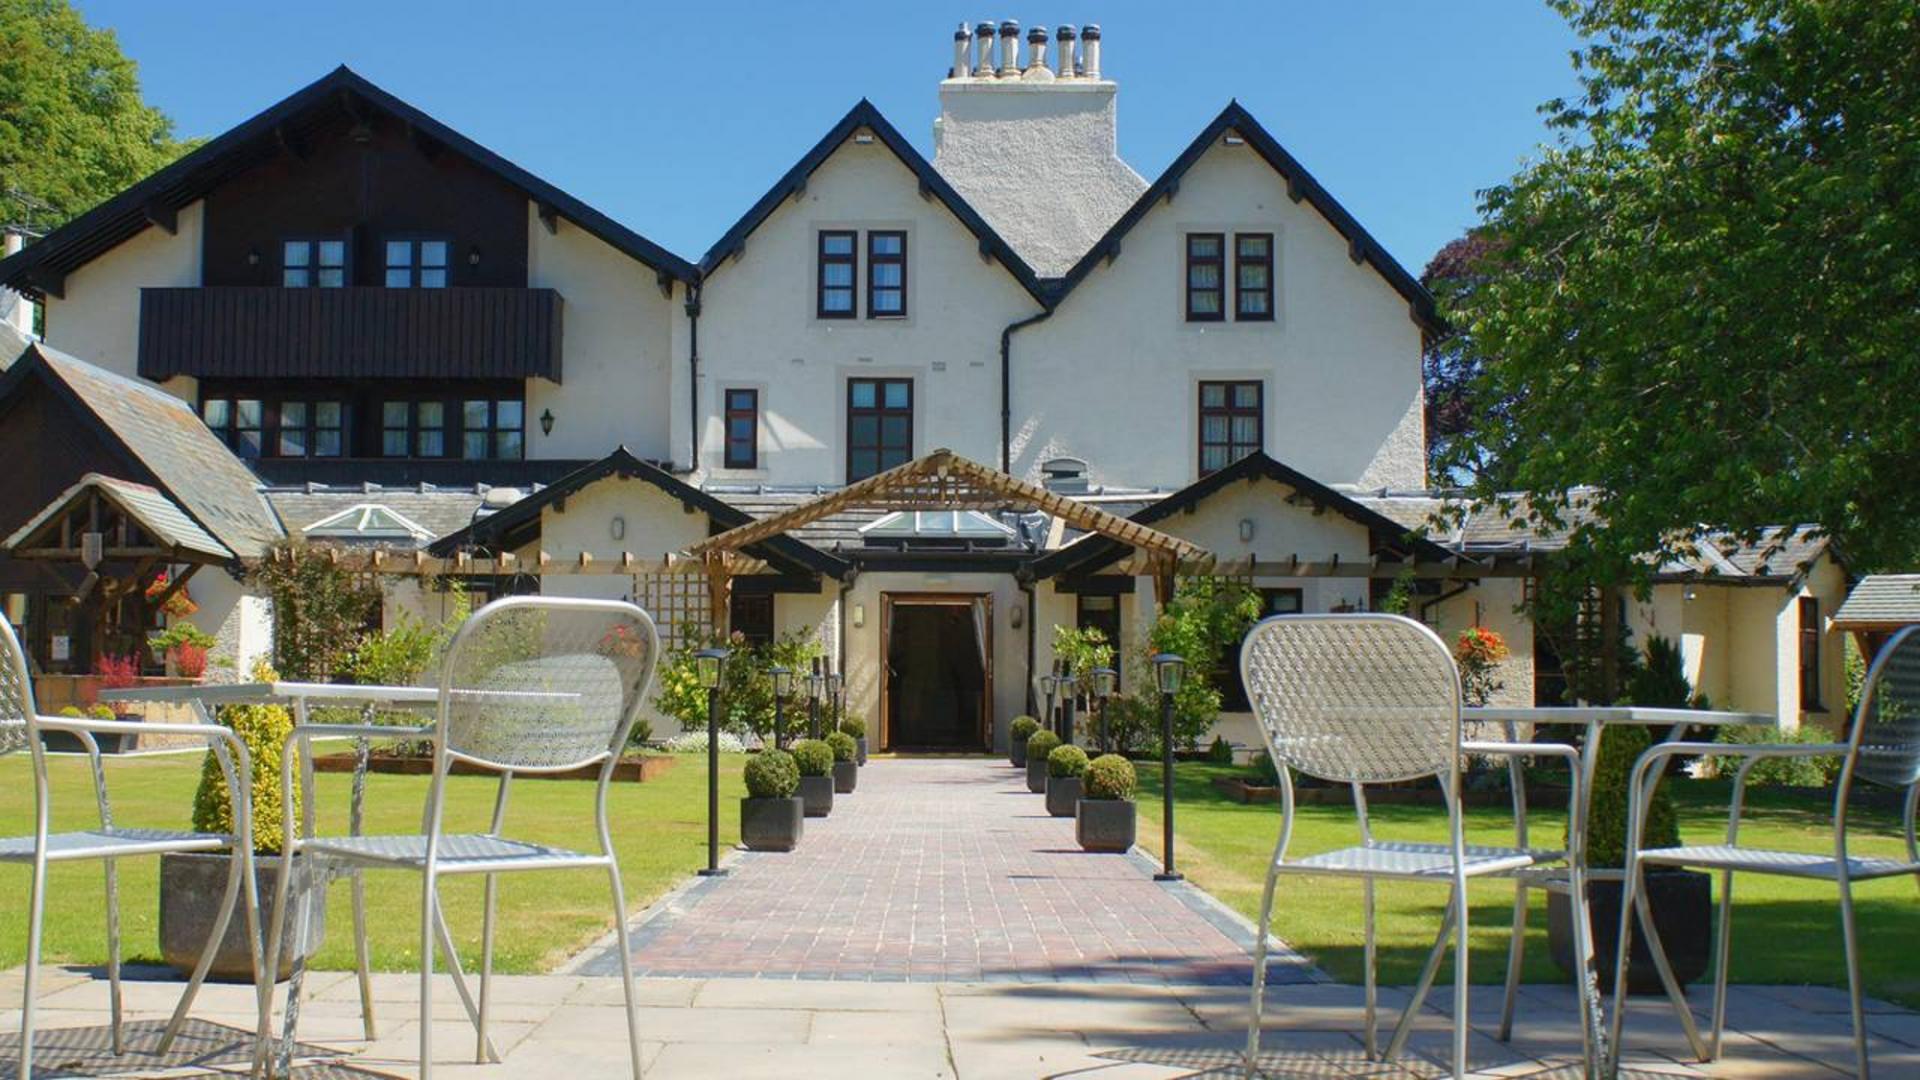 Scottish Borders country house hotel on the market for £1.3m 